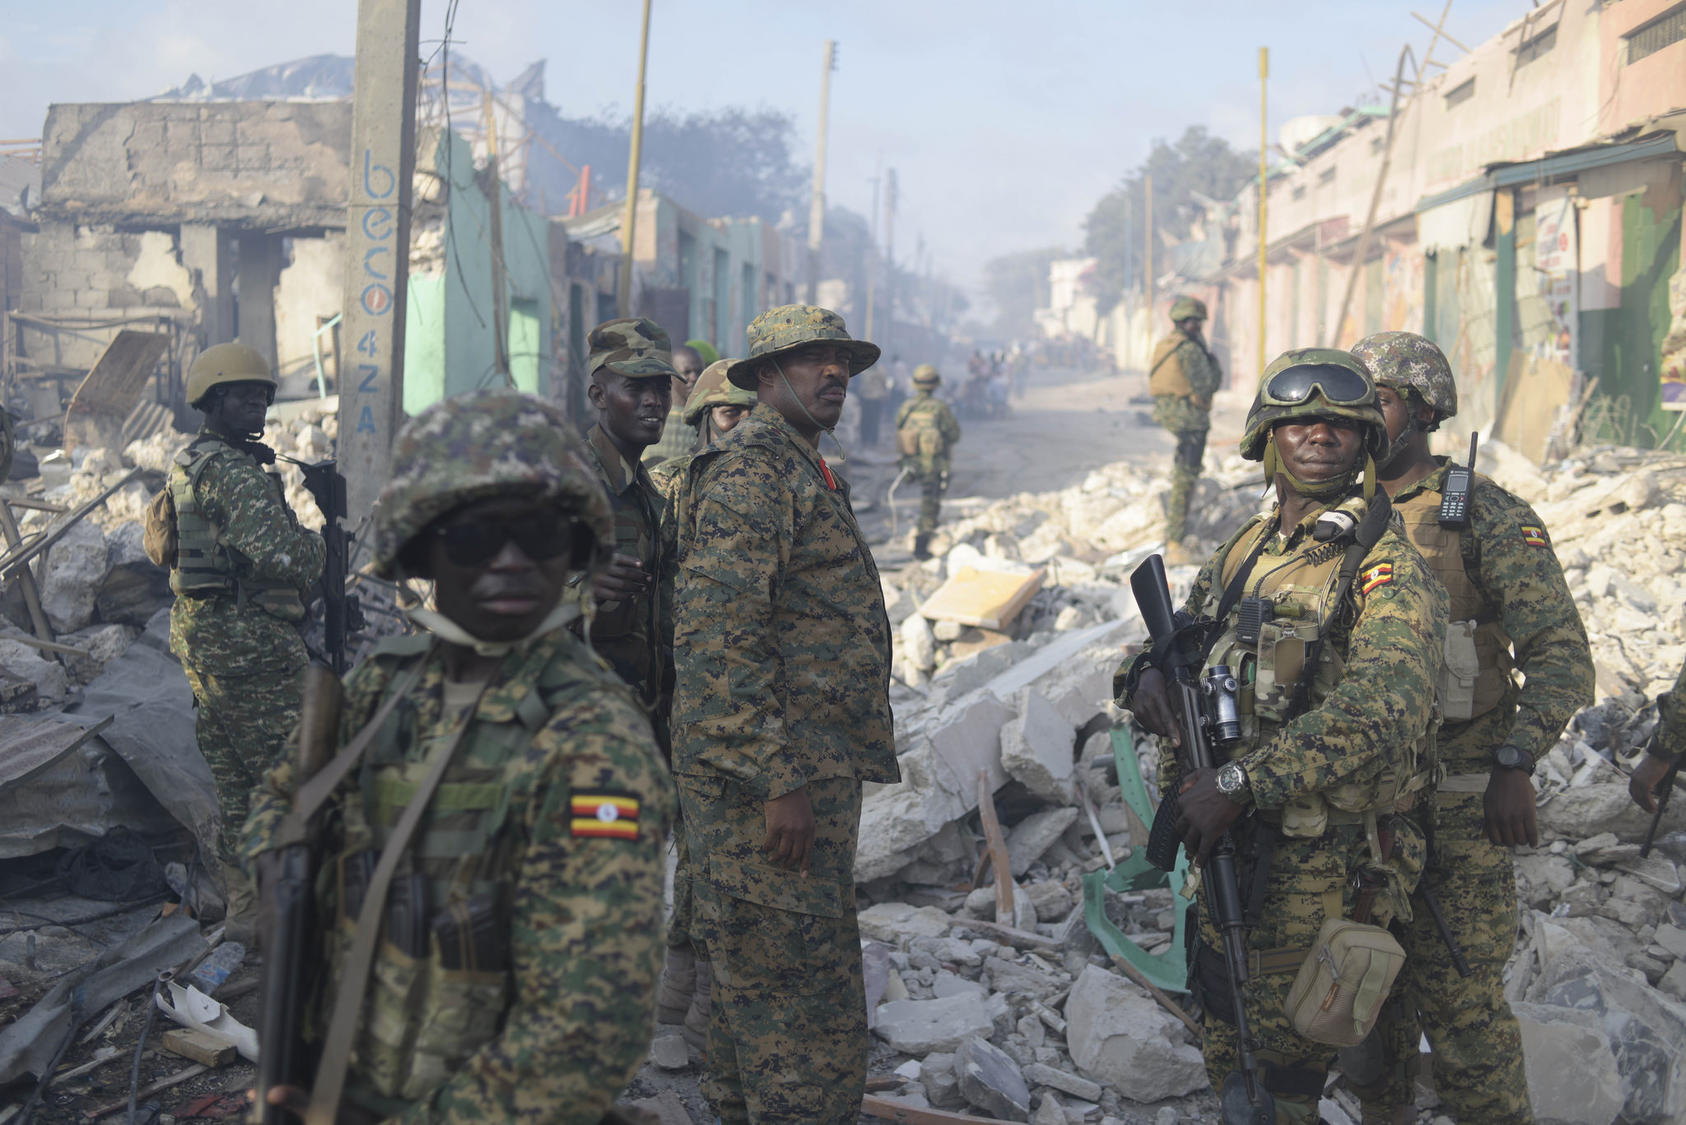 The African Union Mission in Somalia's Ugandan Contingent Commander, Brigadier General Kayanja Muhanga, visits the site of a VBIED attack conducted by the militant group al Shabaab in the Somali capital of Mogadishu on October 15, 2017. Photo Courtesy of Flickr/AMISOM Photo/Tobin Jones